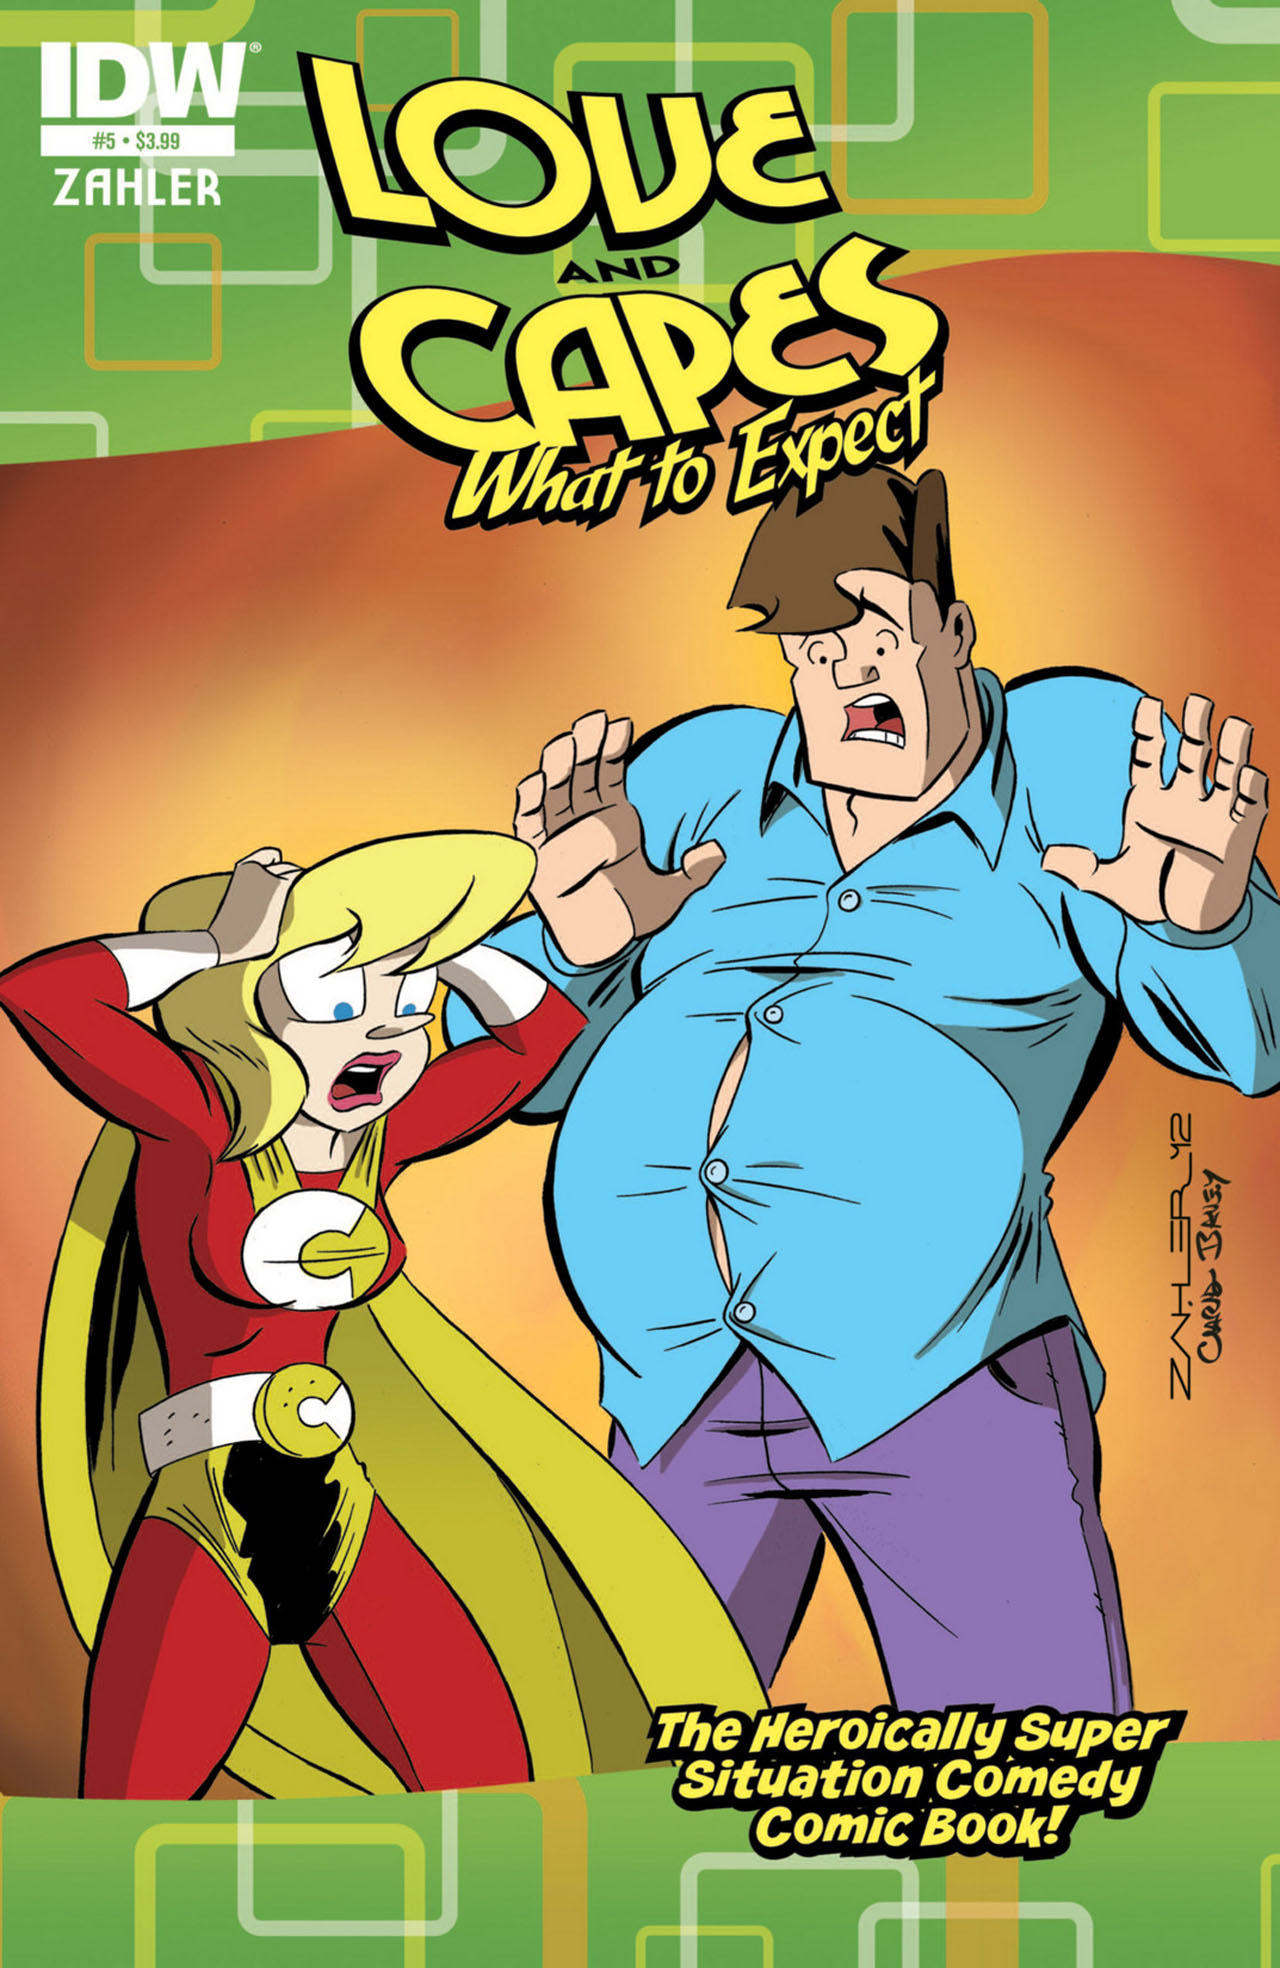 Read online Love and Capes: What to Expect comic -  Issue #5 - 1